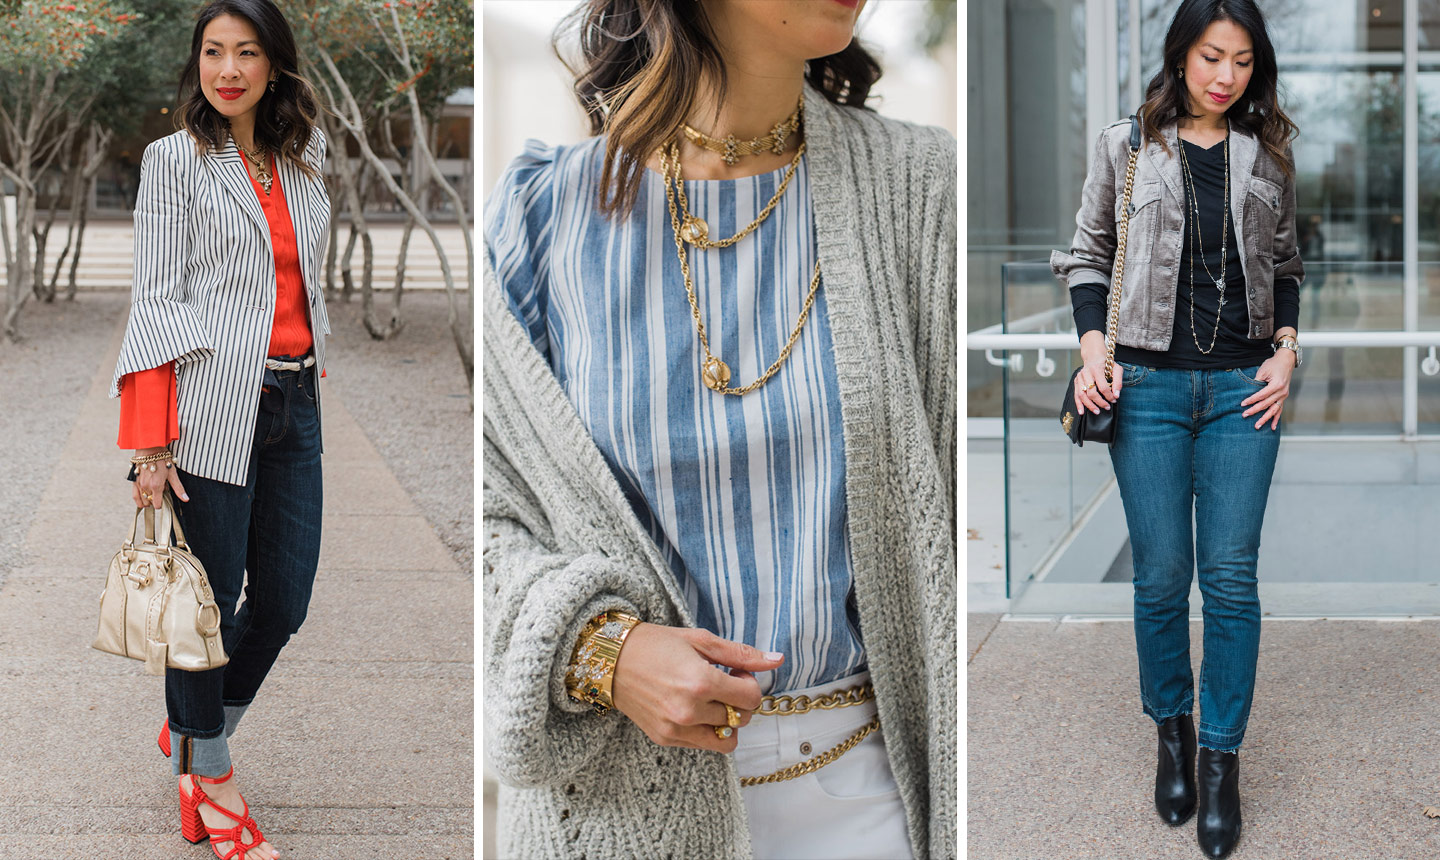 transitional fashion: winter warms to spring